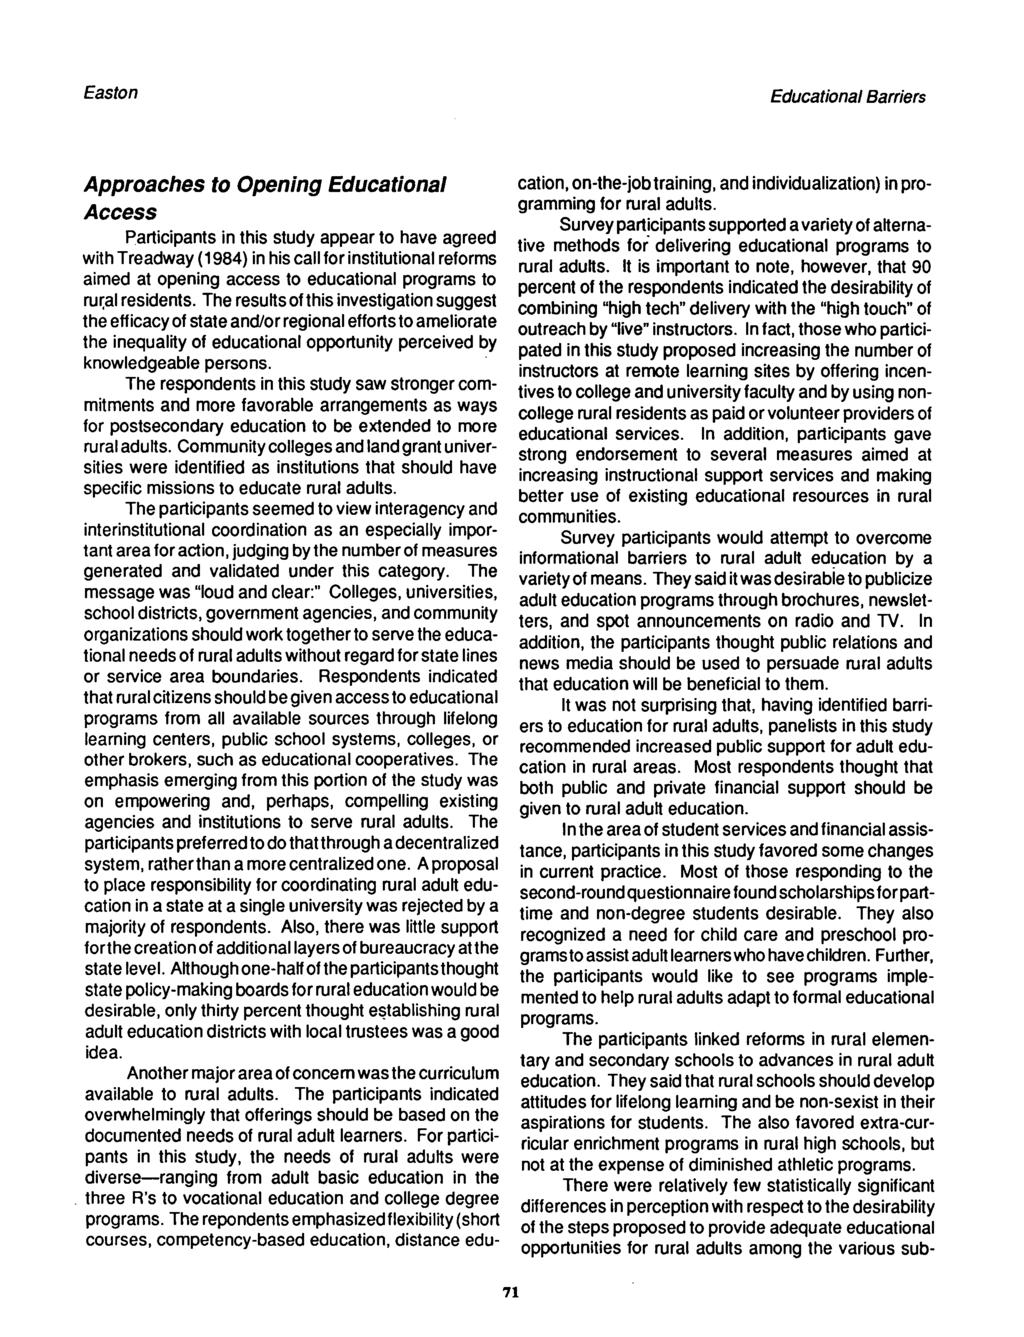 Approaches to Opening Educational Access Participants in this study appear to have agreed with Treadway (1984) in his call for institutional reforms aimed at opening access to educational programs to